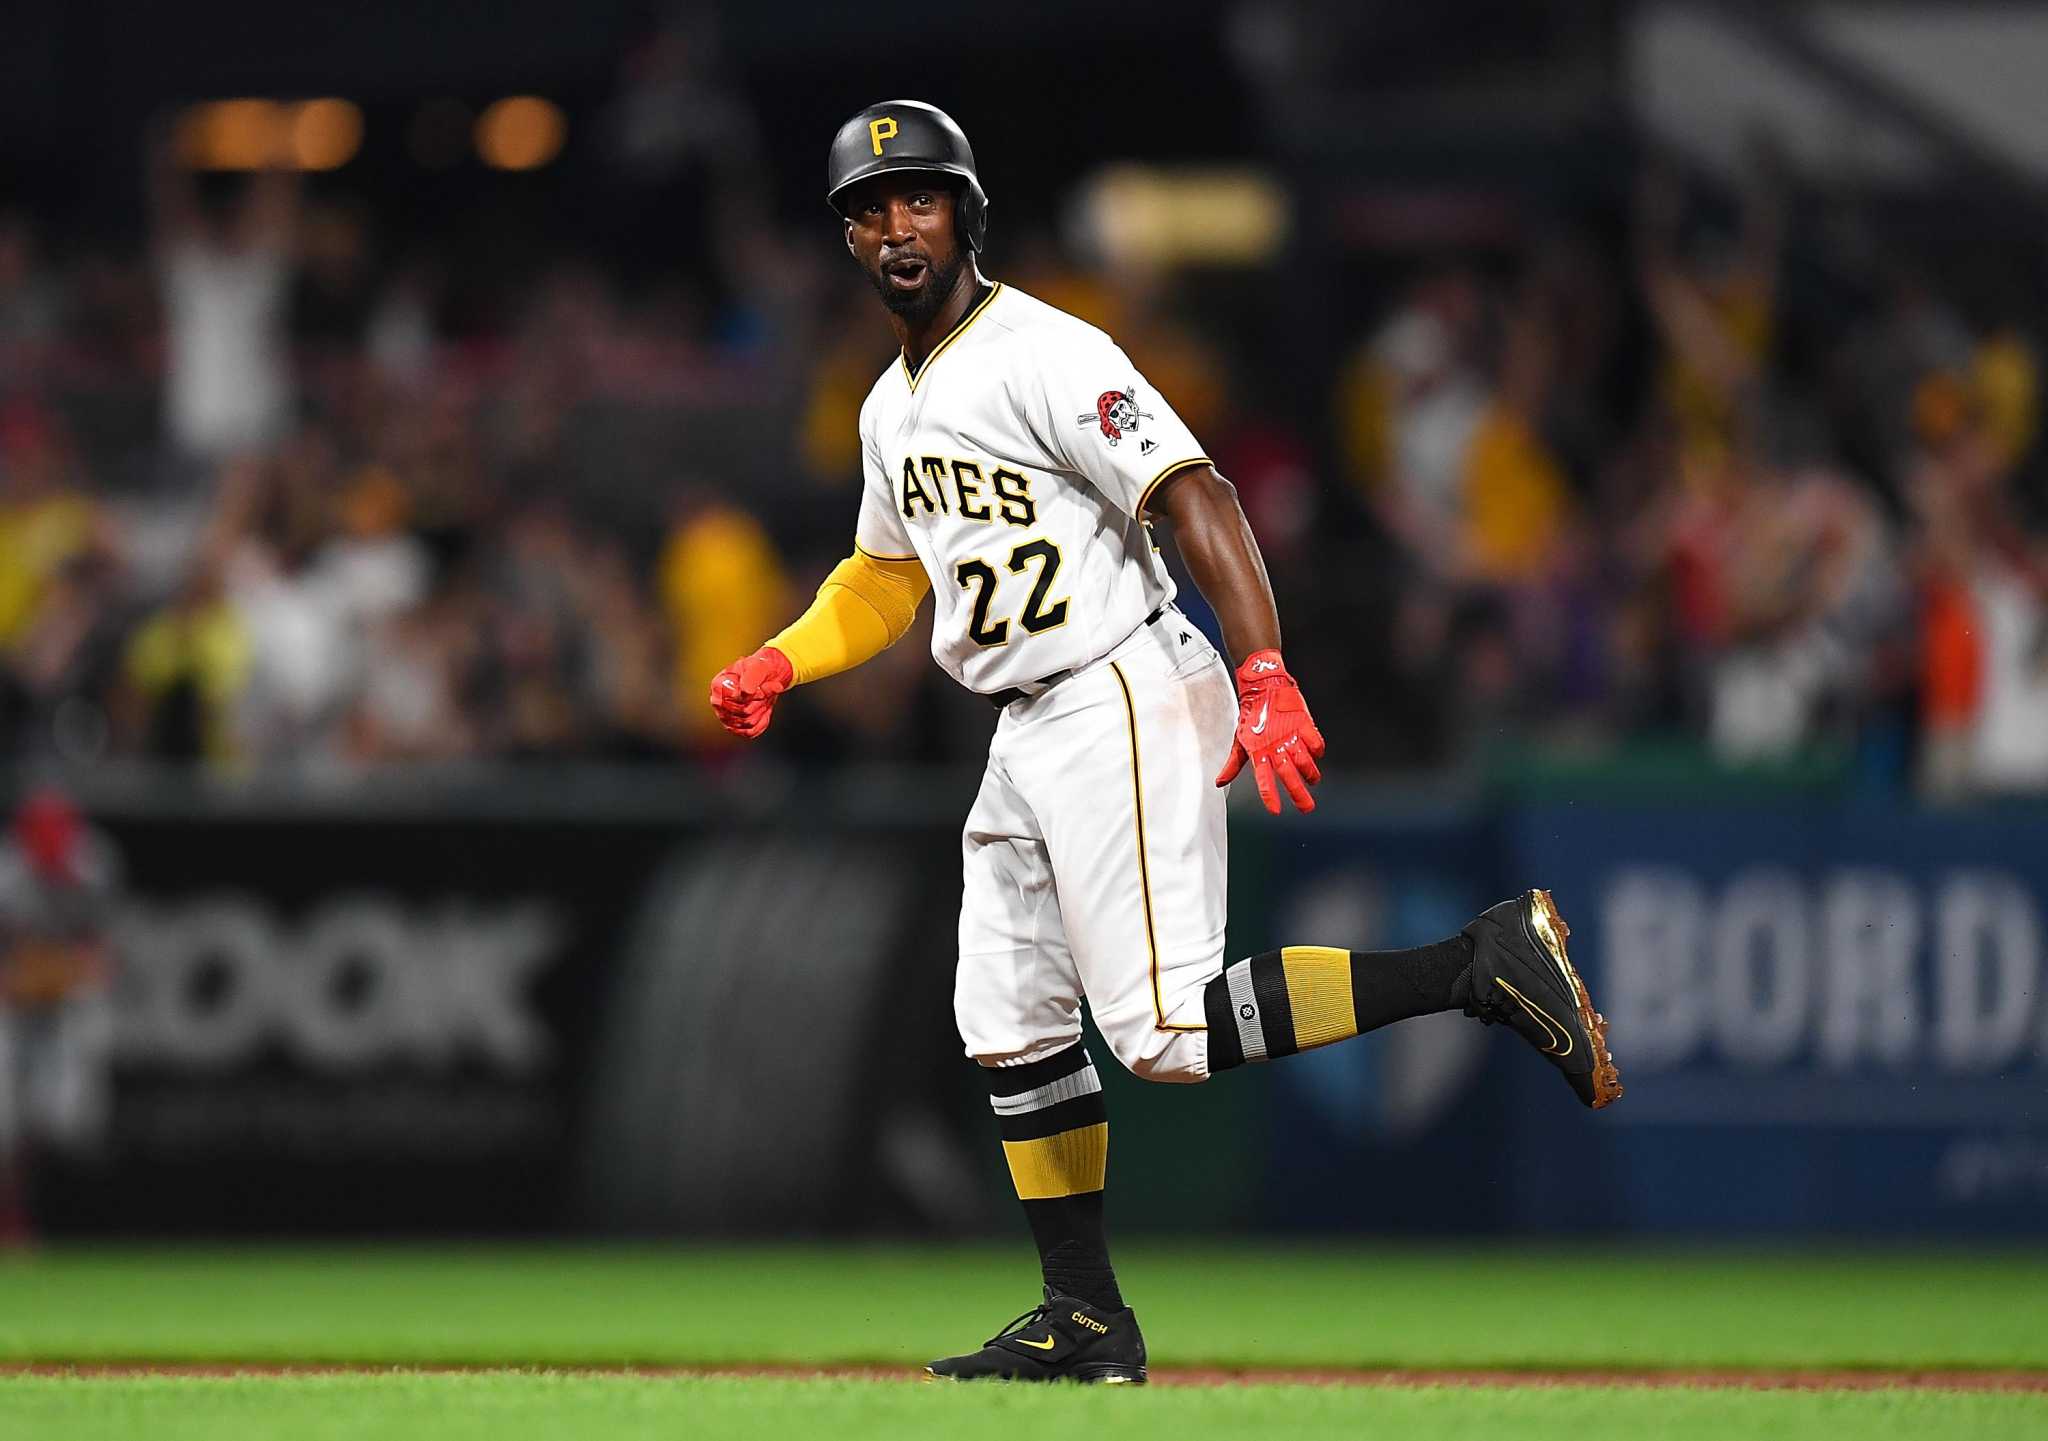 Andrew McCutchen played for the Yankees, and that's worth